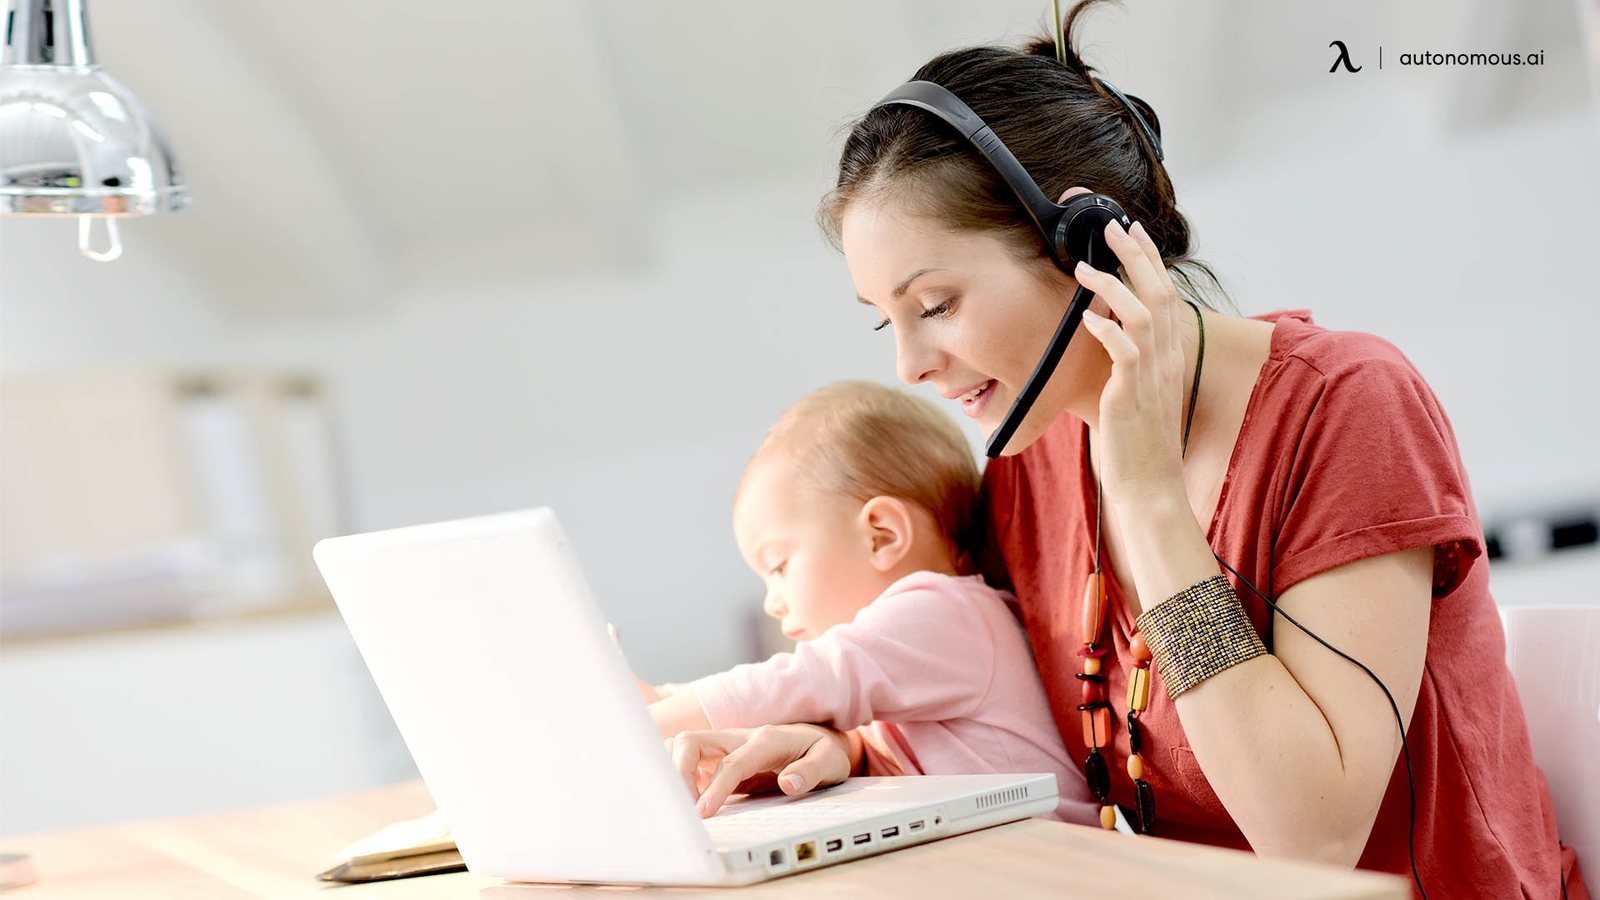 How to Maintain Family Work Balance for Teleworking Parents?